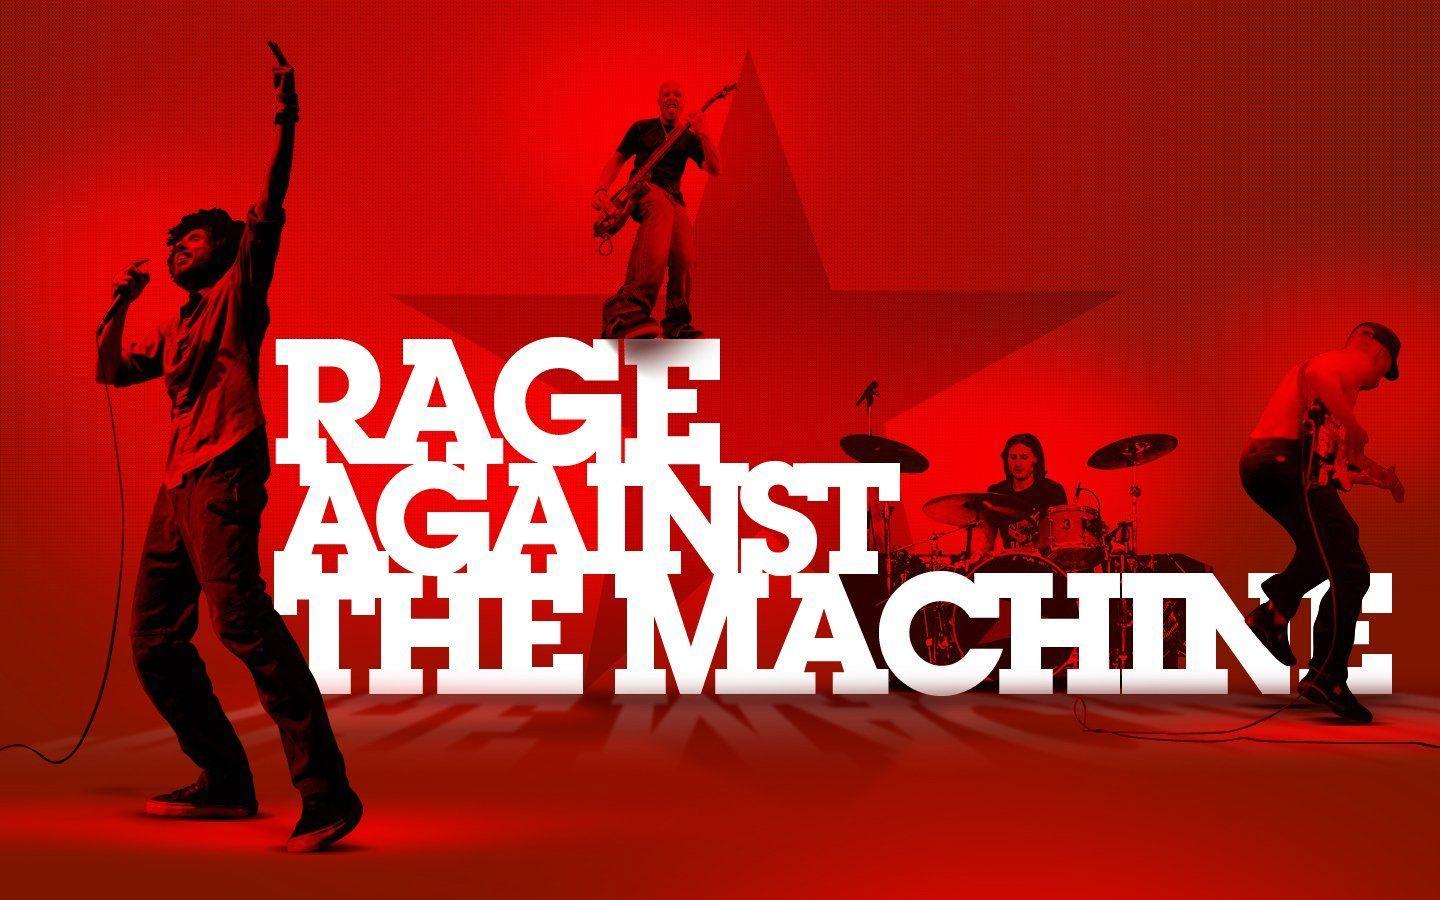 16 Rage Against The Machine HD Wallpapers